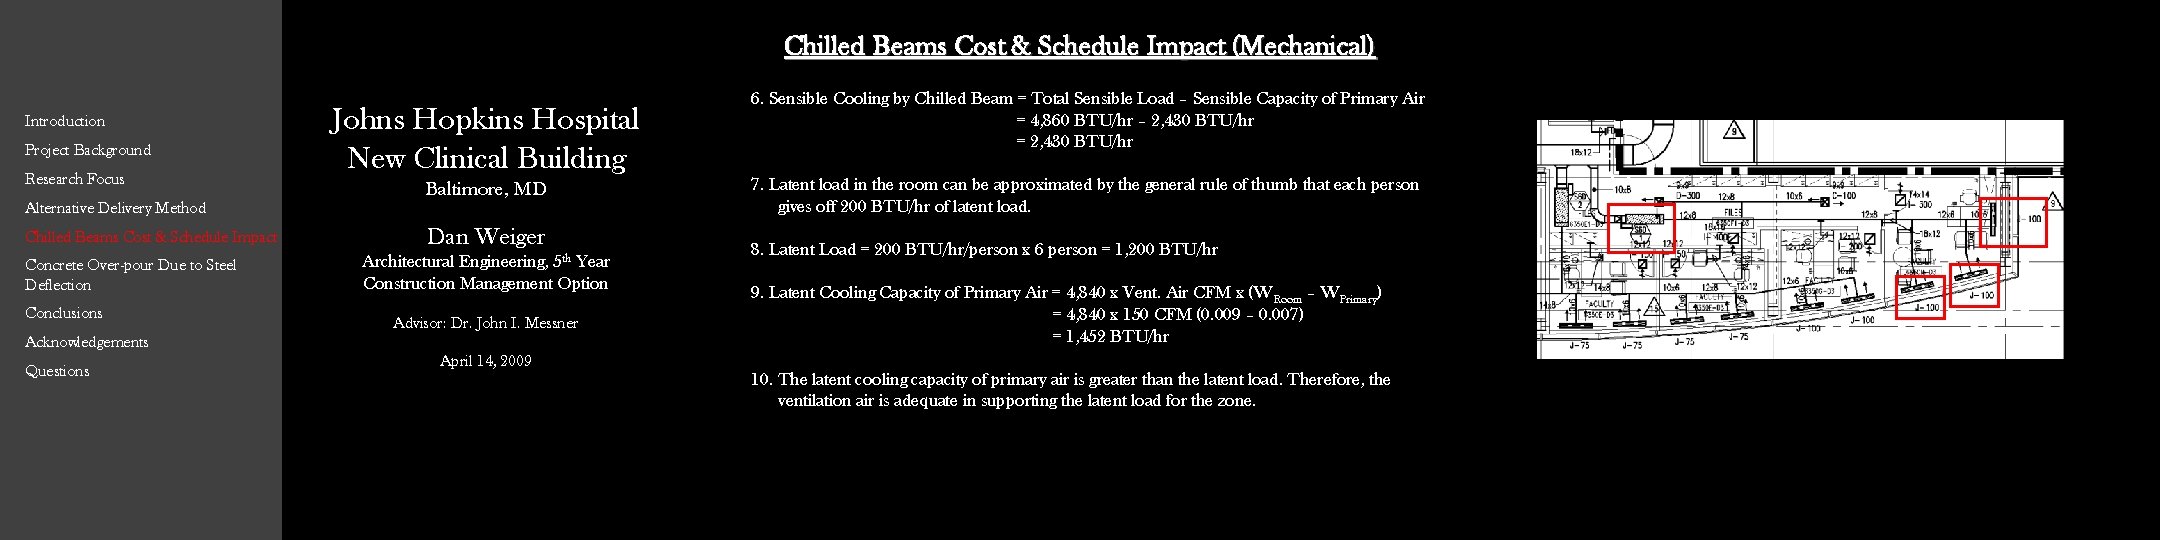 Chilled Beams Cost & Schedule Impact (Mechanical) Introduction Project Background Research Focus Alternative Delivery